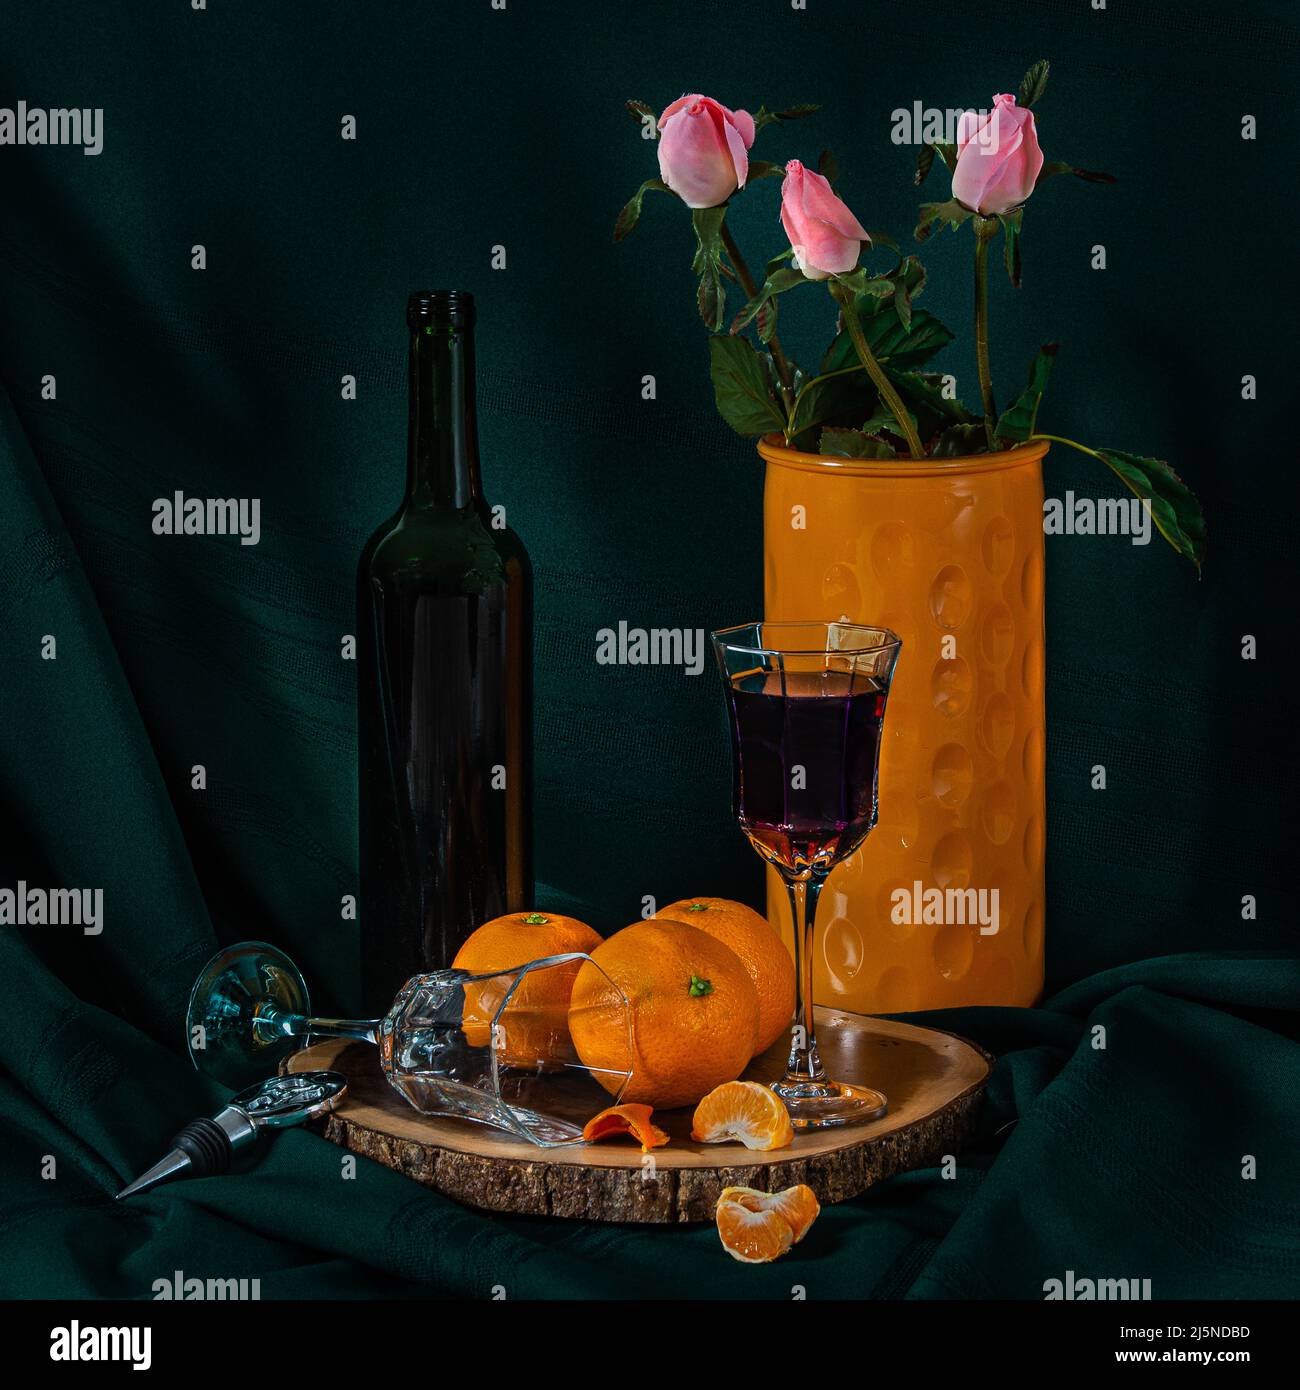 A dark and atmospheric photo of a still life, a bottle of wine, glasses, oranges and a bottle with roses. Stock Photo